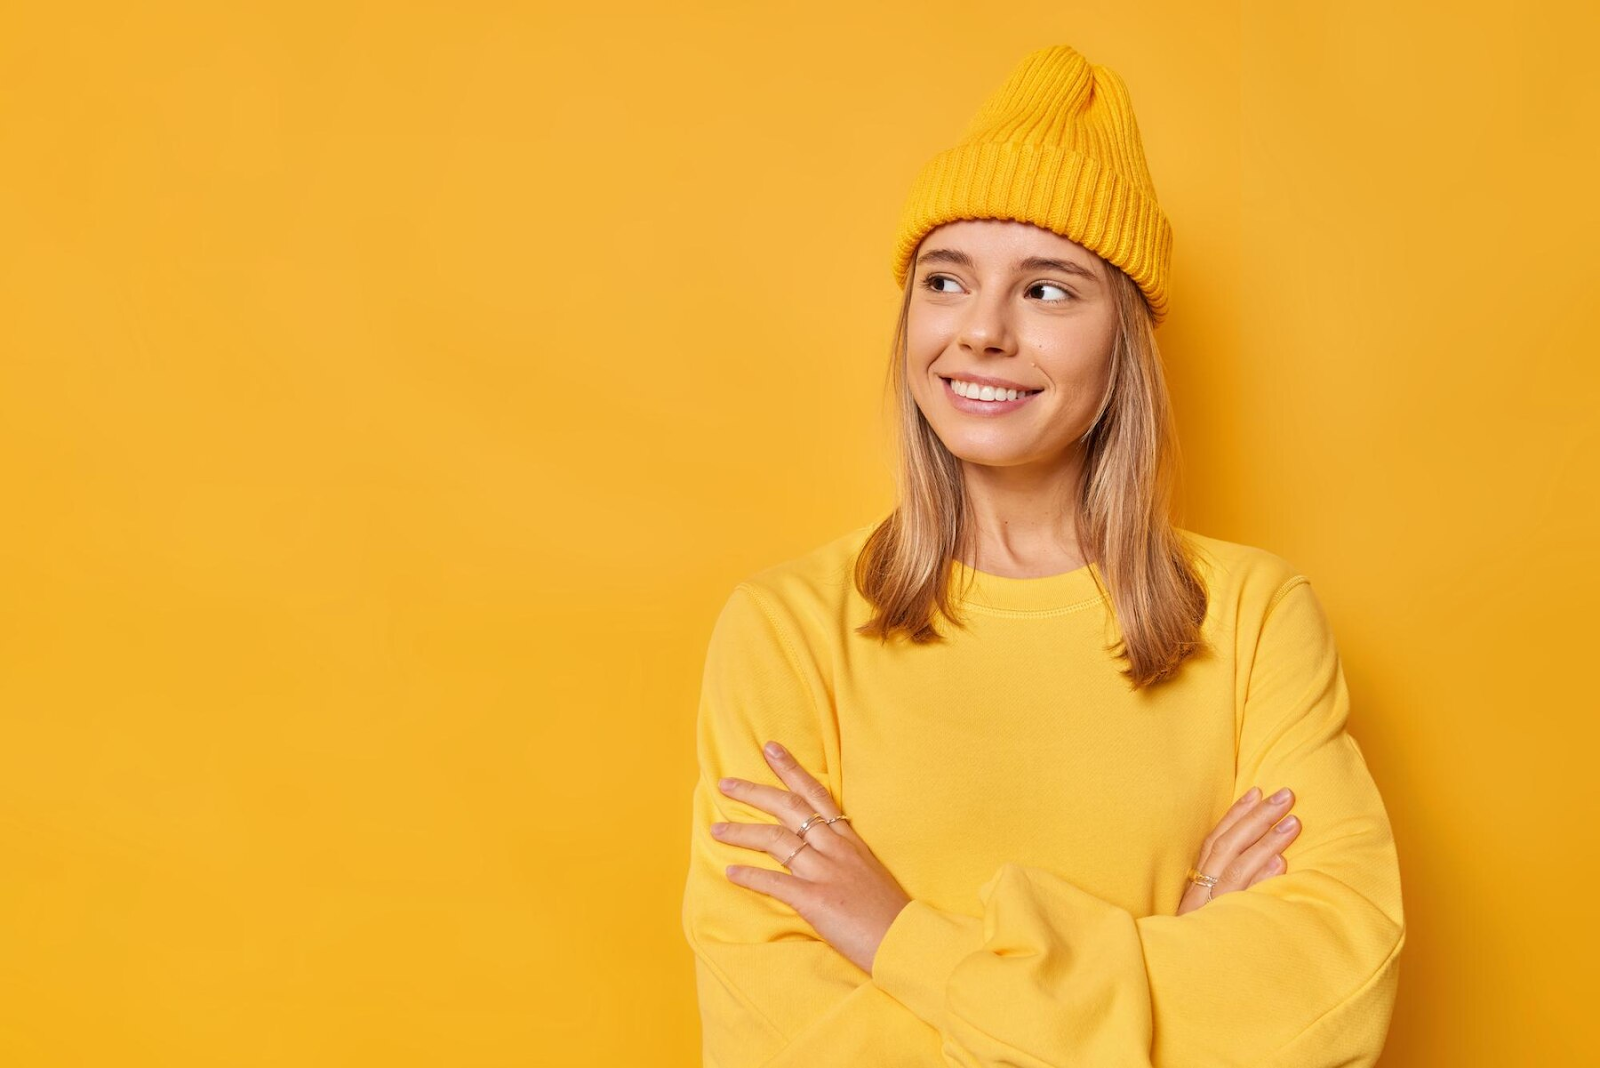 A woman wearing yellow looks away and smiles.